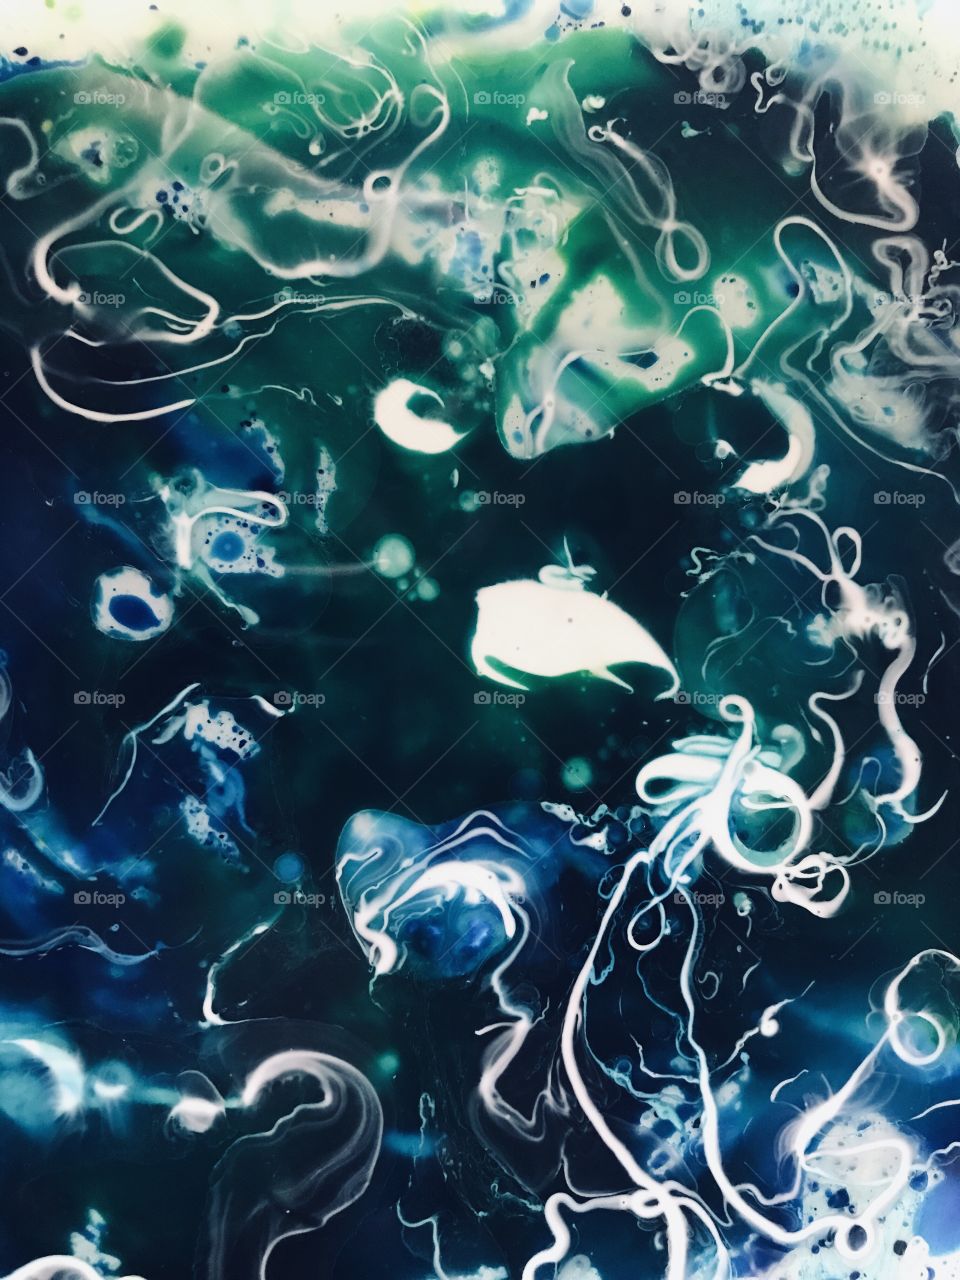 Creating soft, flowing, dynamic, three dimensional abstracts today. Stones, marbles, oil, food dye, glue, water, dish soap and a small paint brush. This one blue and green and painted in lines with white glue. Fun!!!